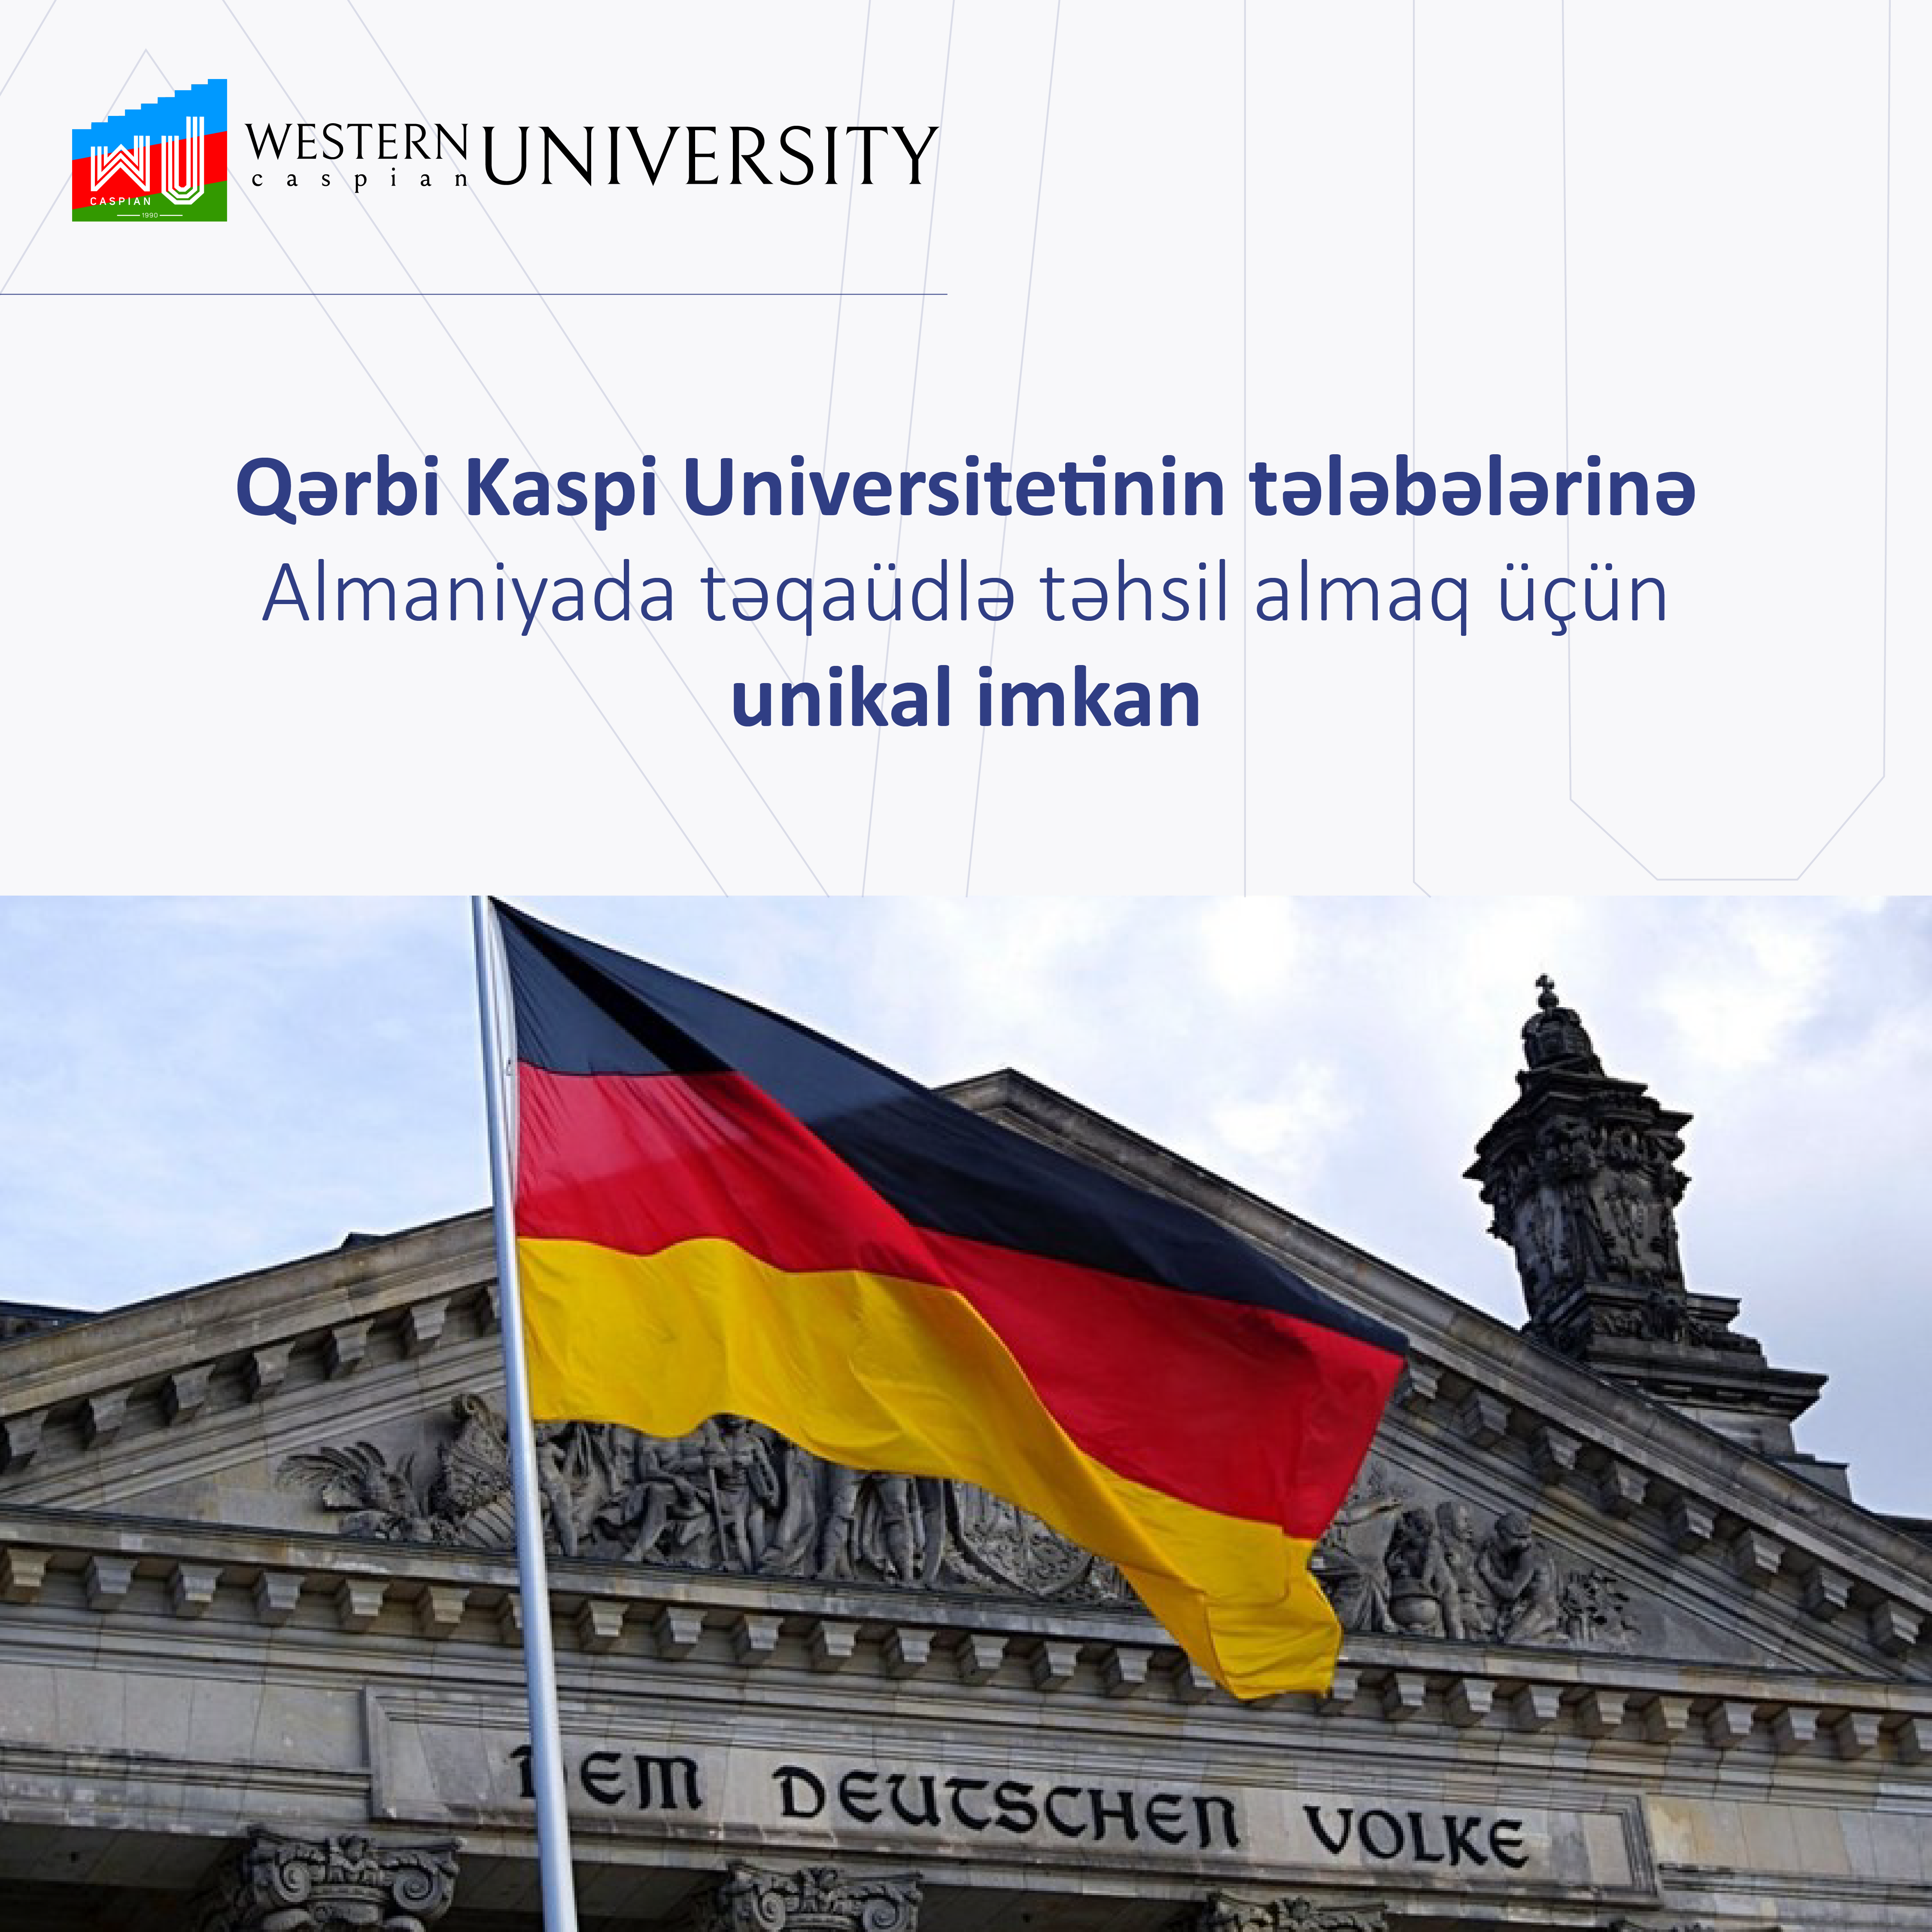 A chance to study in Germany with a scholarship for our students!